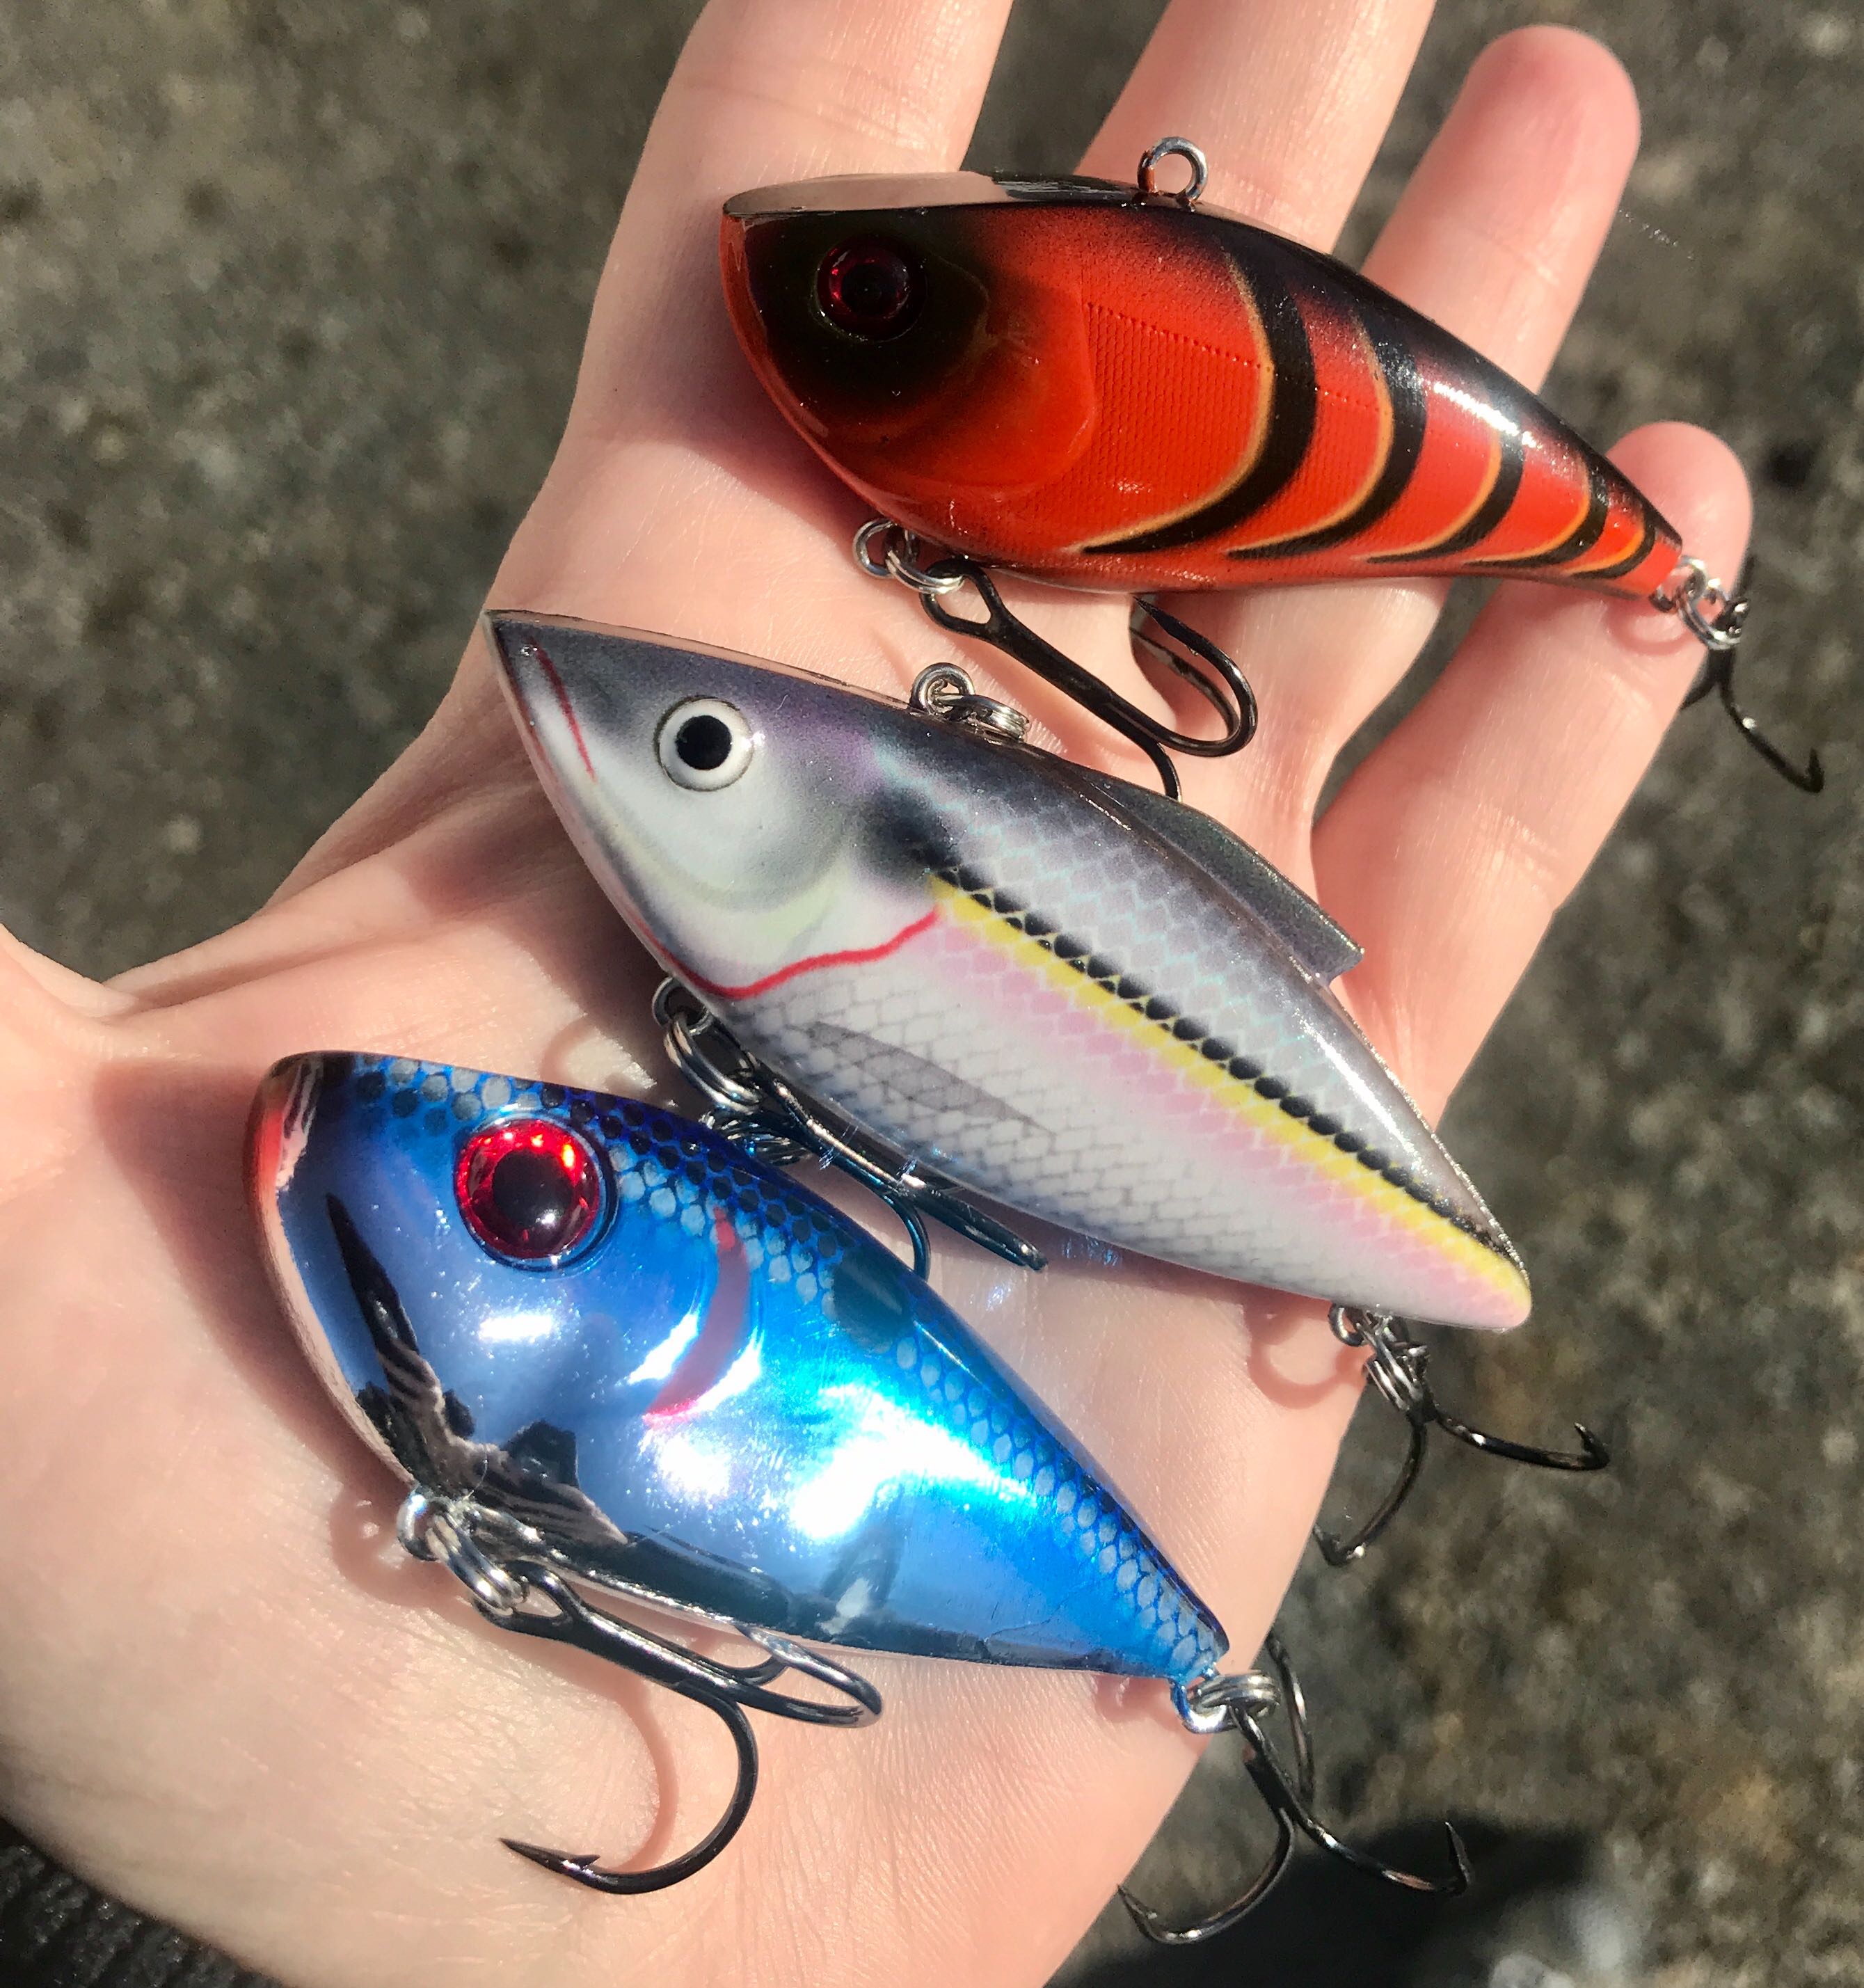 X Zone Lures - 6 Deception Worm in Electric Shad - This color is